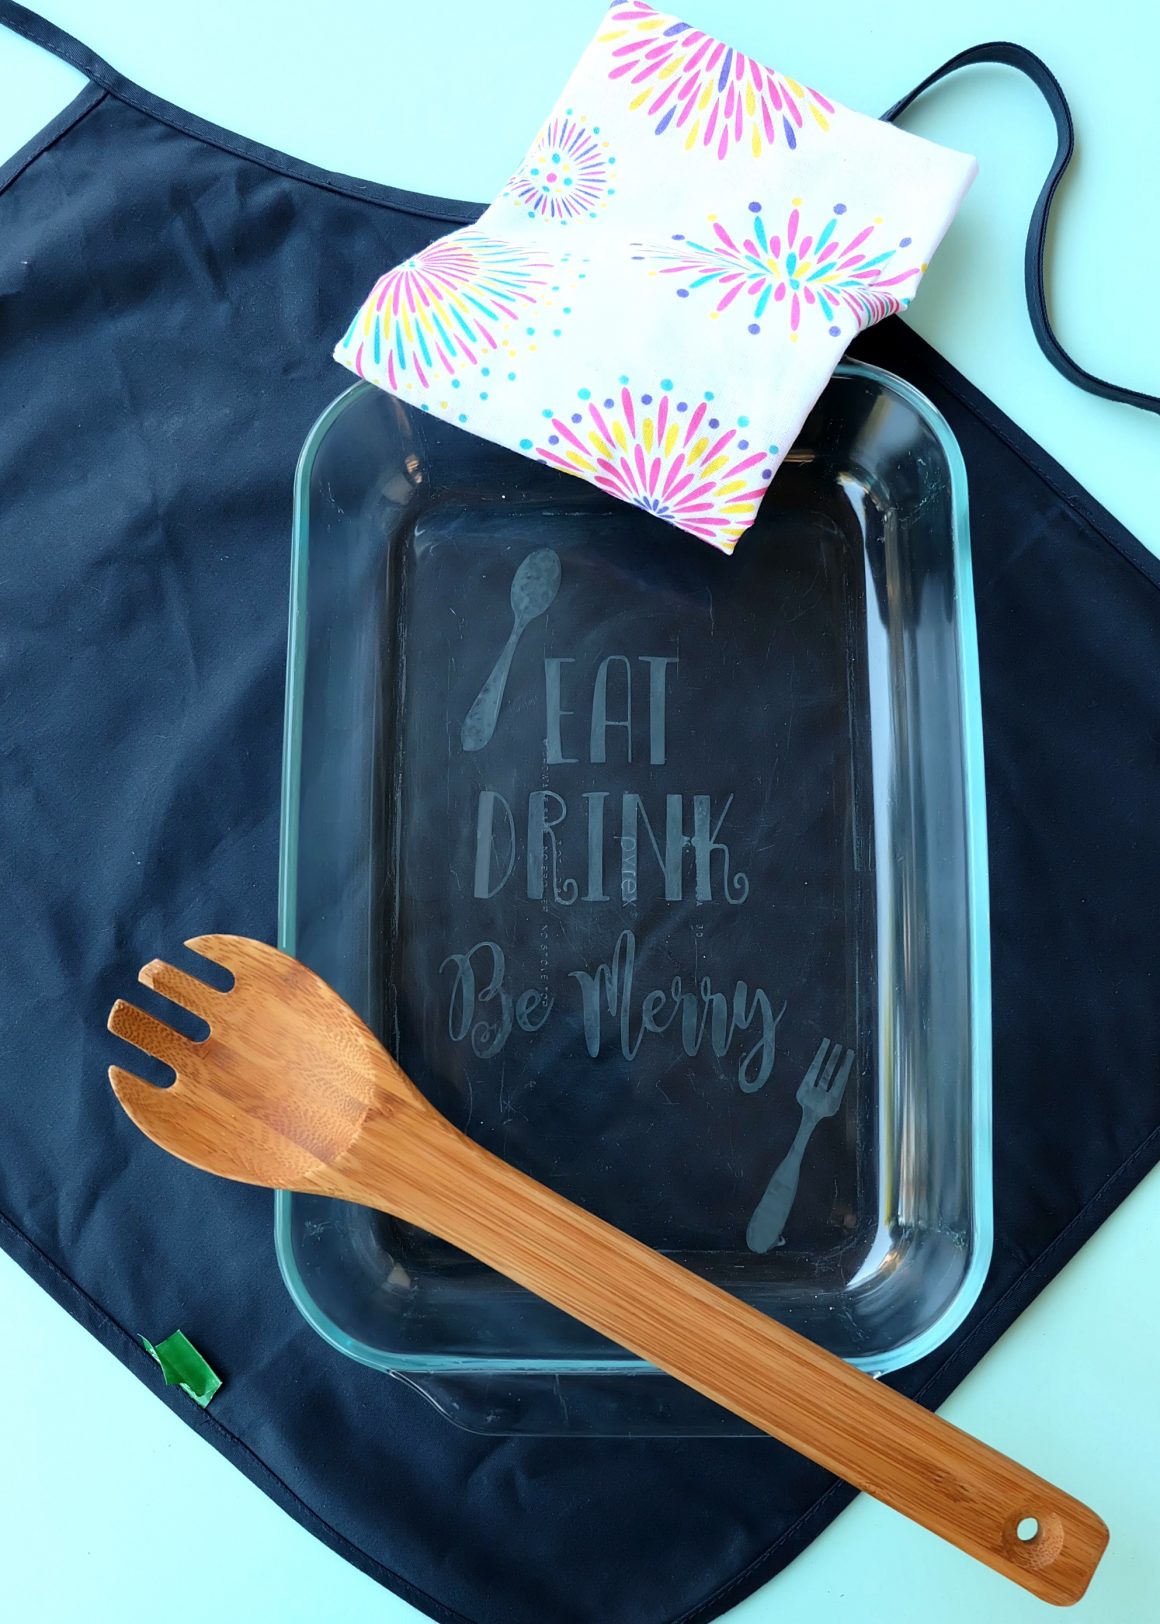 DIY Etched Glass Casserole Dish Made With a Cricut